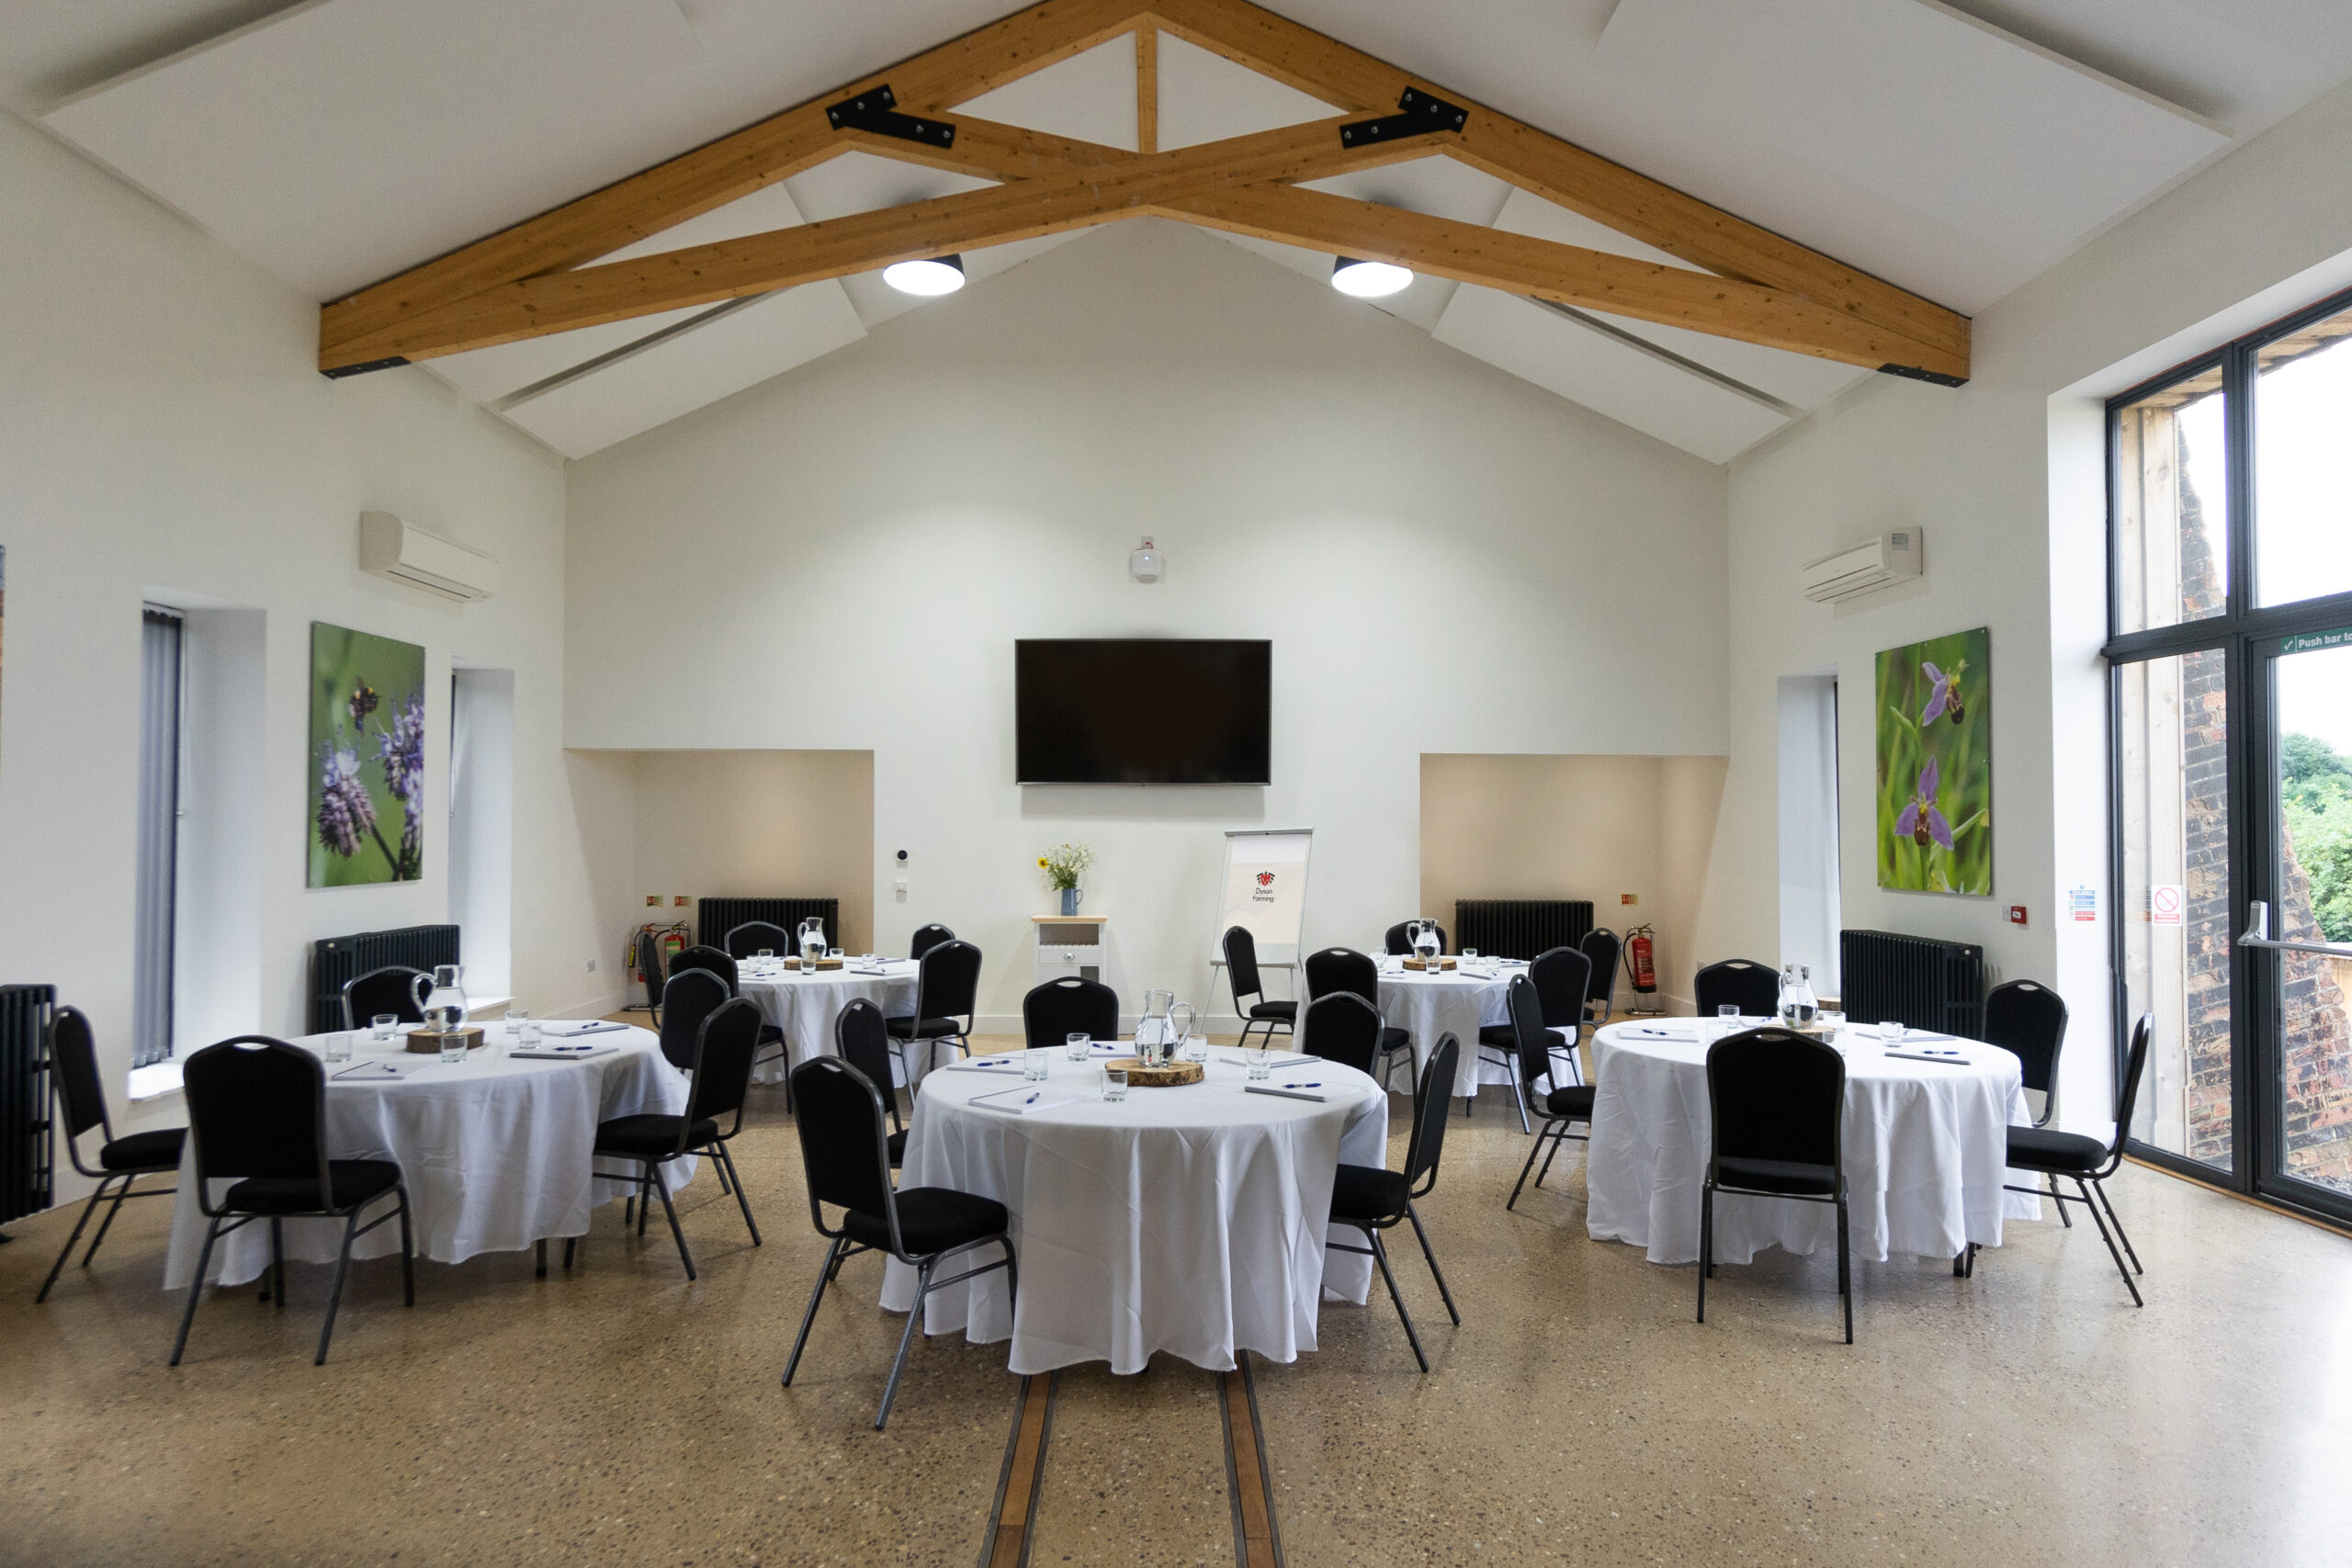 The Hive Function Room